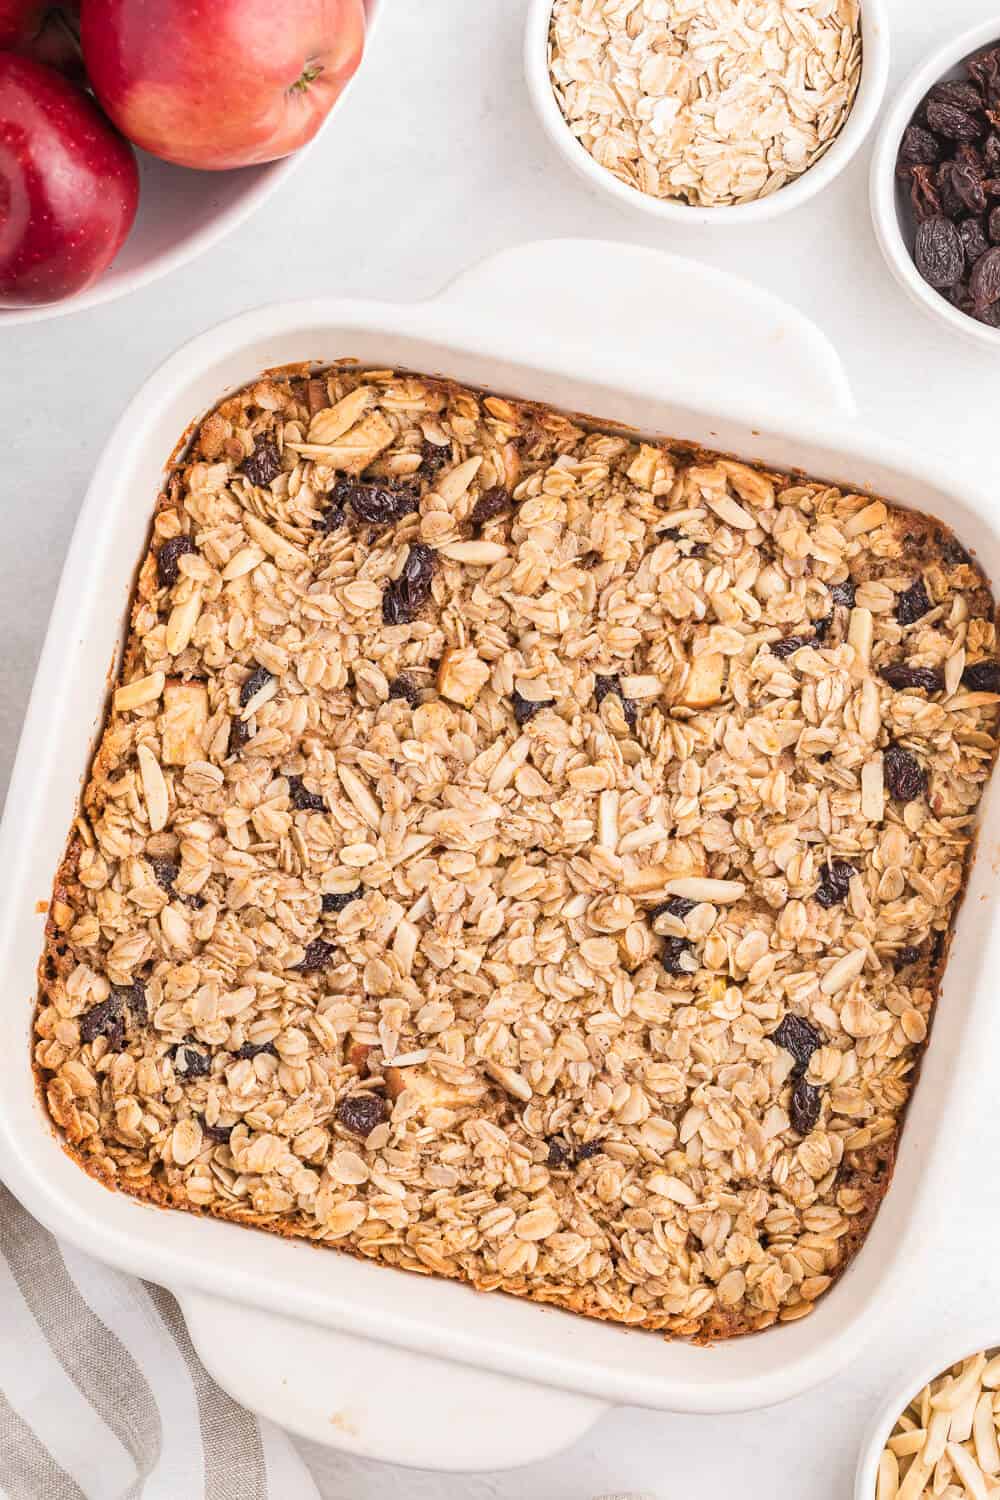 Oatmeal Casserole - This baked oatmeal is hearty, warm and filling. Loaded with apples, raisins and almonds, or whatever your favourite additions are, the whole family is sure to enjoy it!